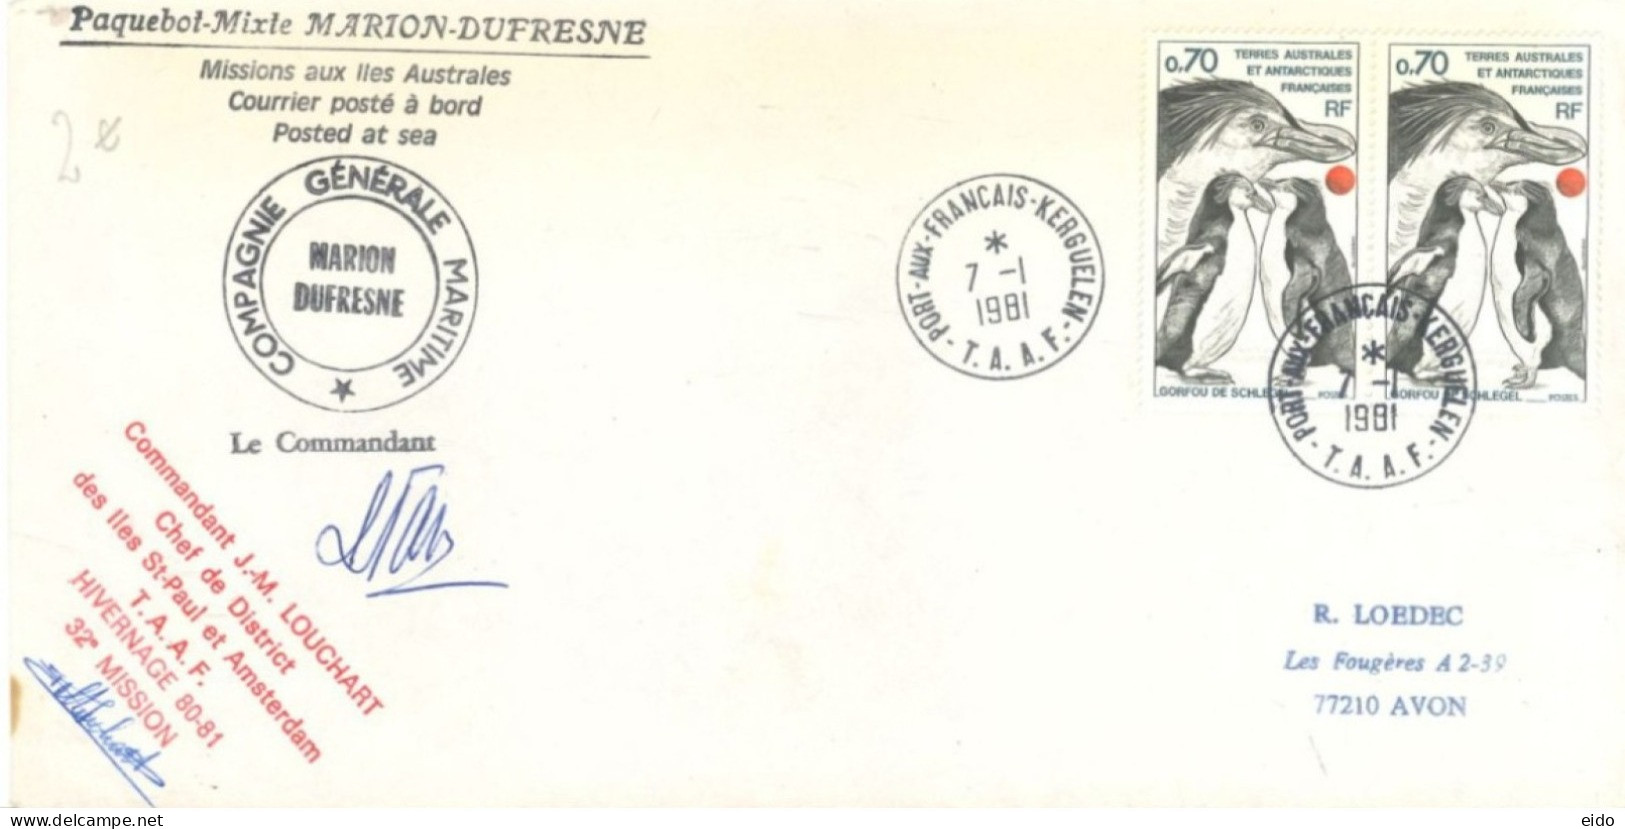 AUSTRALIAN ANTARCTIC TERRITORY - 1981, POSTED AT SEA SPECIAL COVER SIGNED BY COMMANDER J.M. LOUCHART SENT TO AVON FRANCE - Covers & Documents